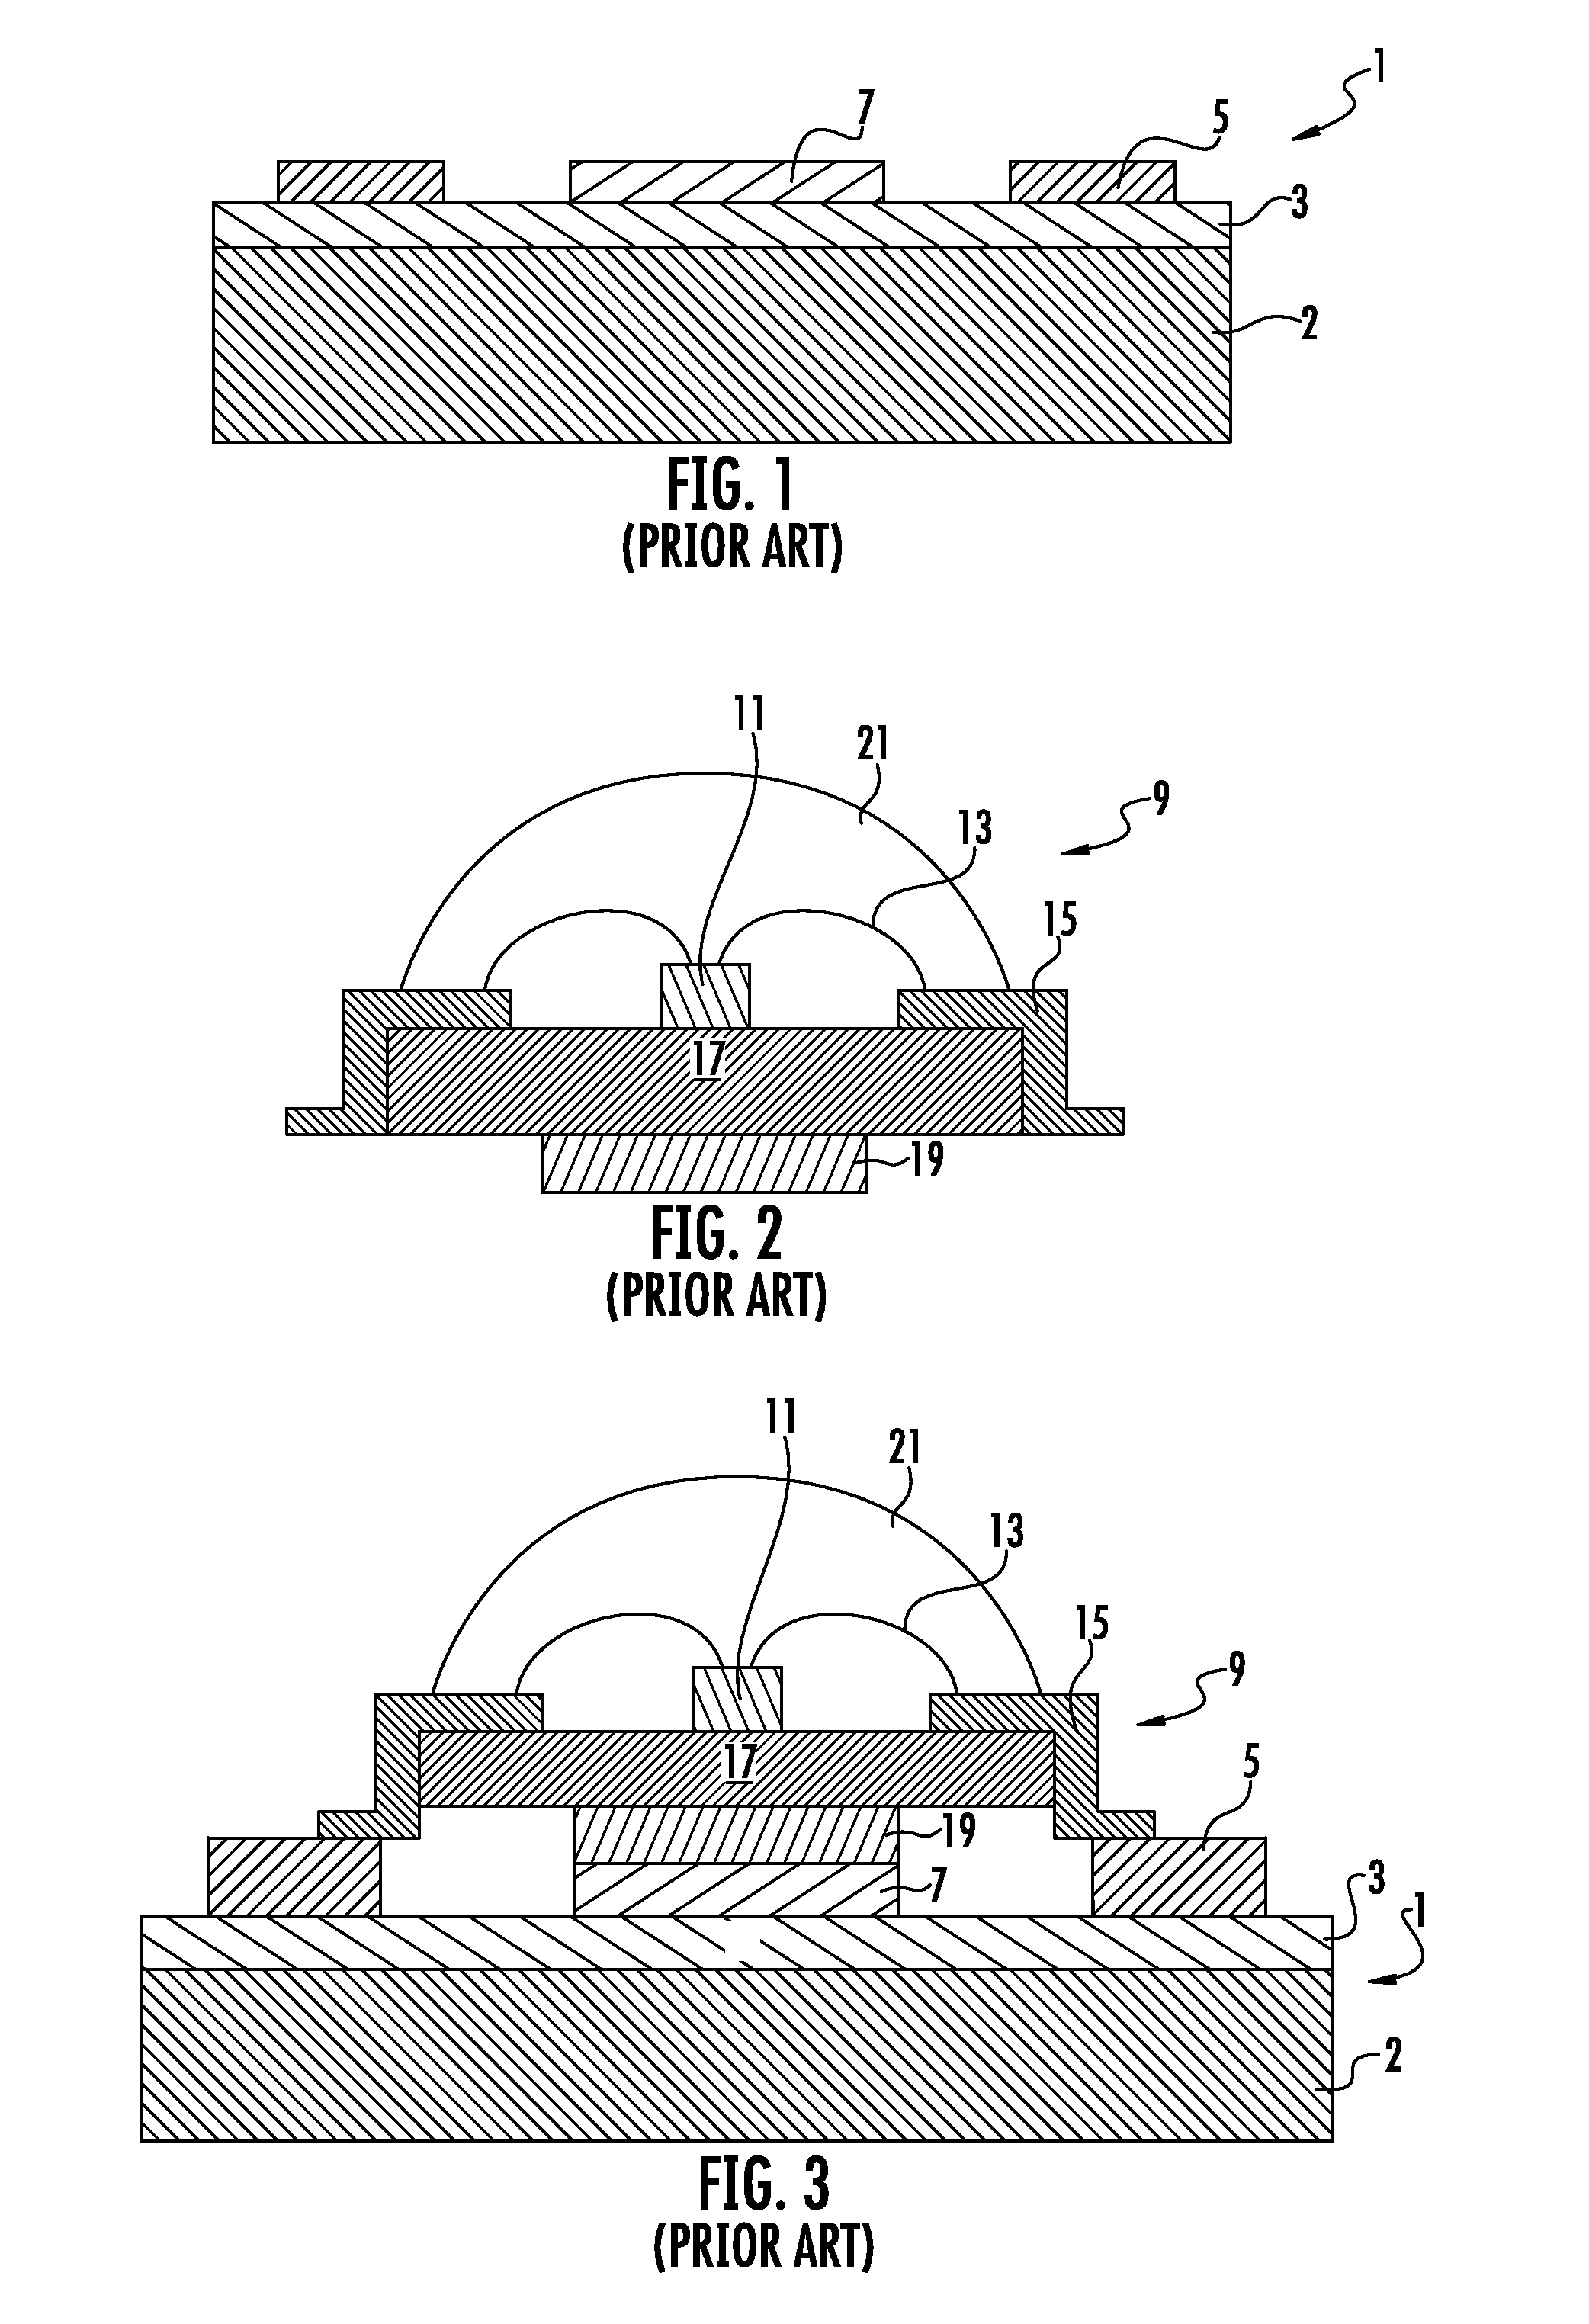 Circuit board with thermo-conductive pillar